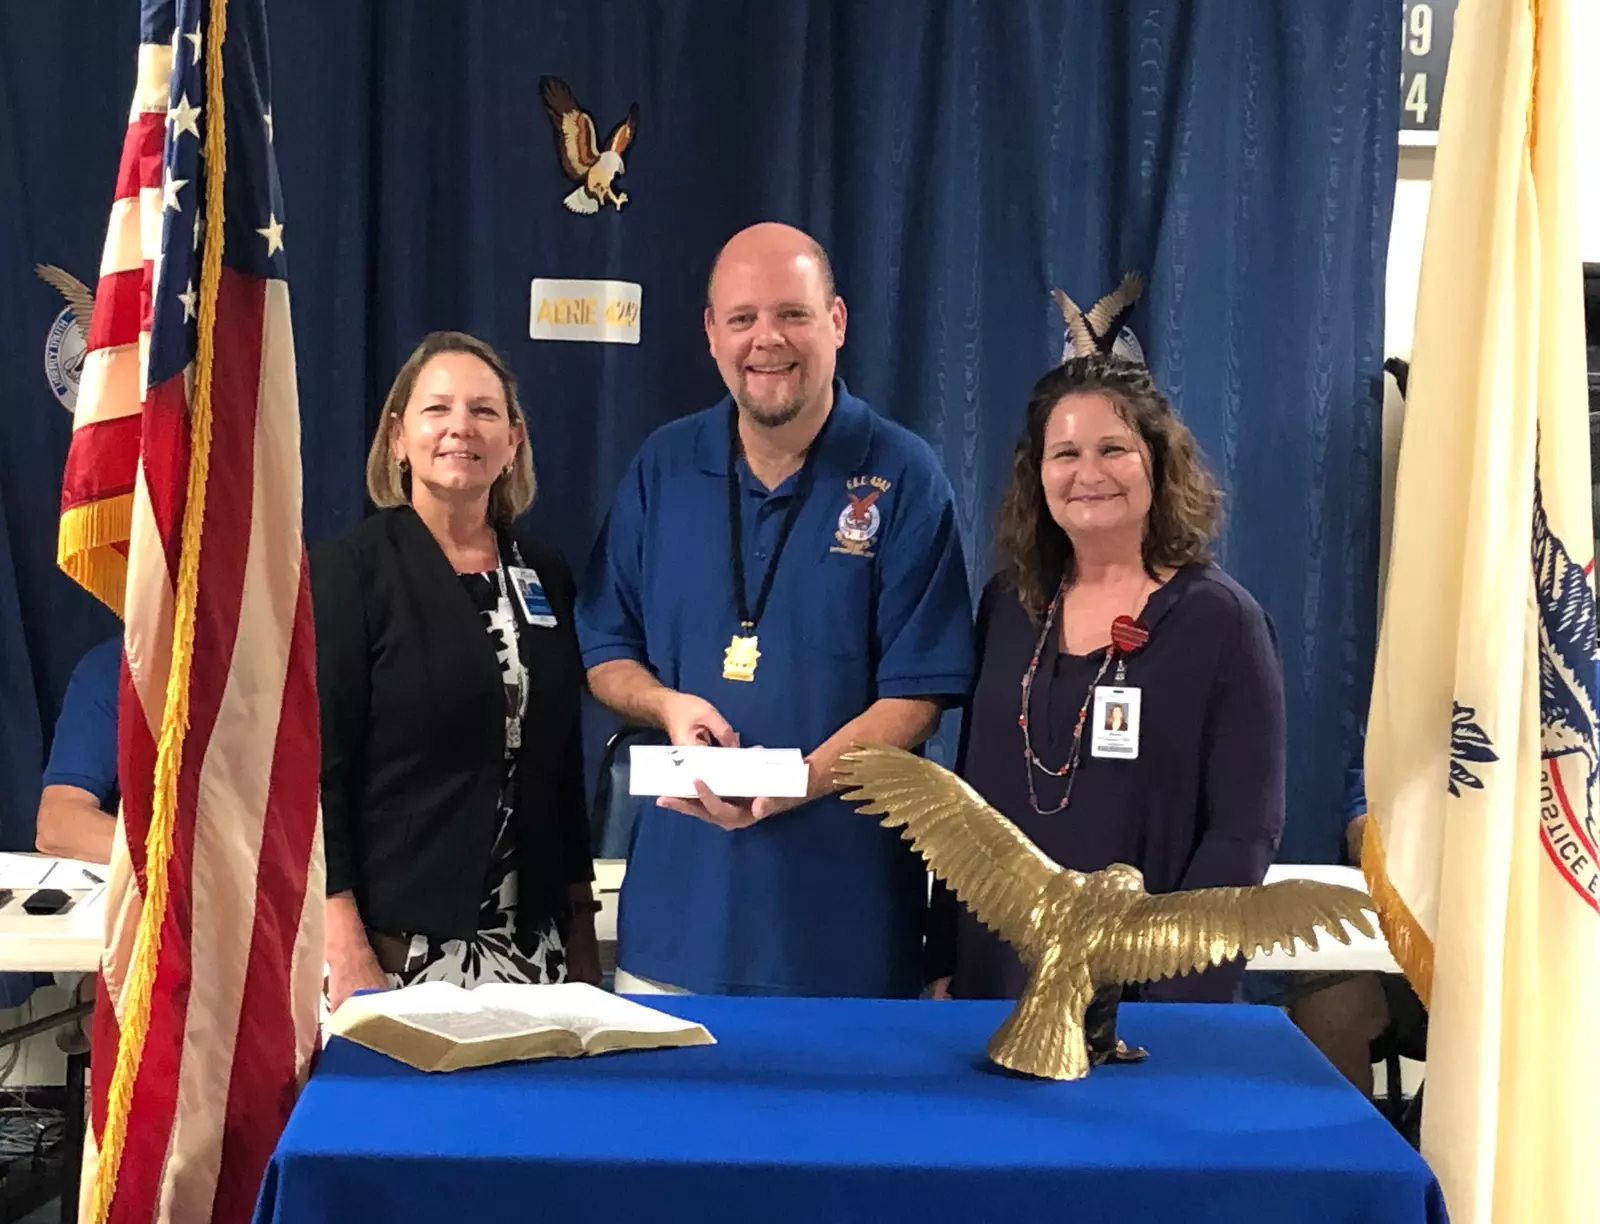 Eagles Donate Funds to Support Services at AdventHealth New Smyrna Beach